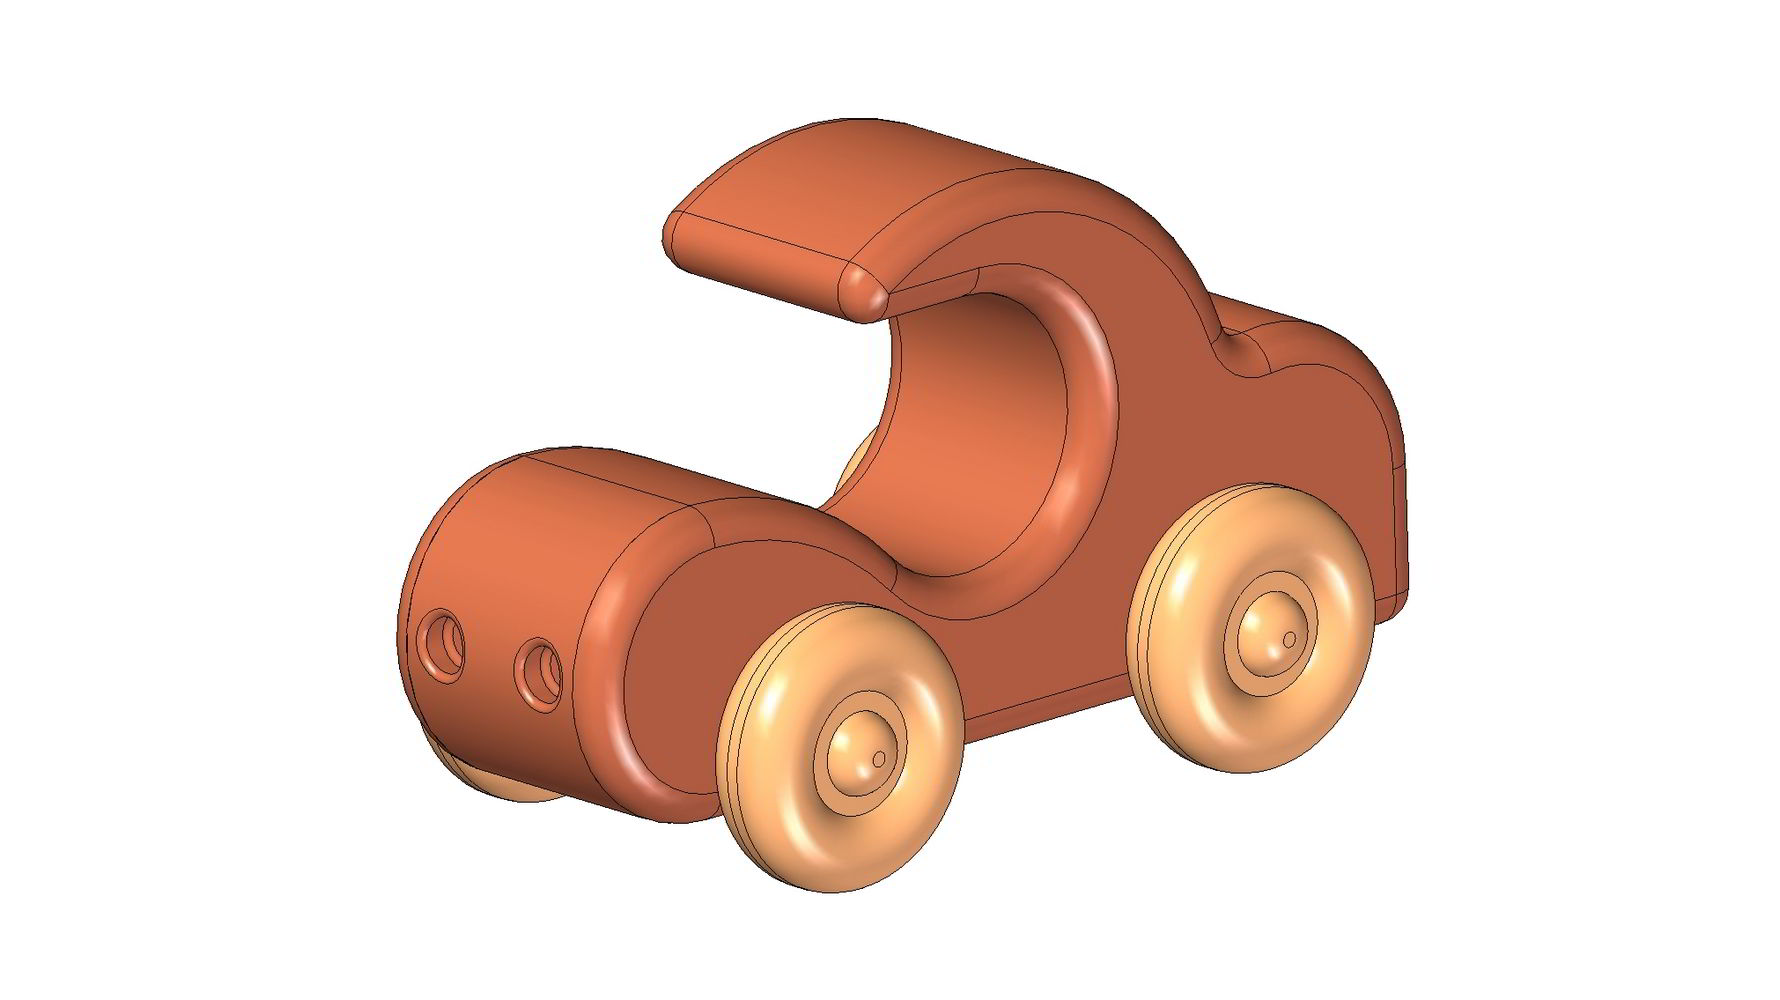 Simple Wooden Toy Car Plans